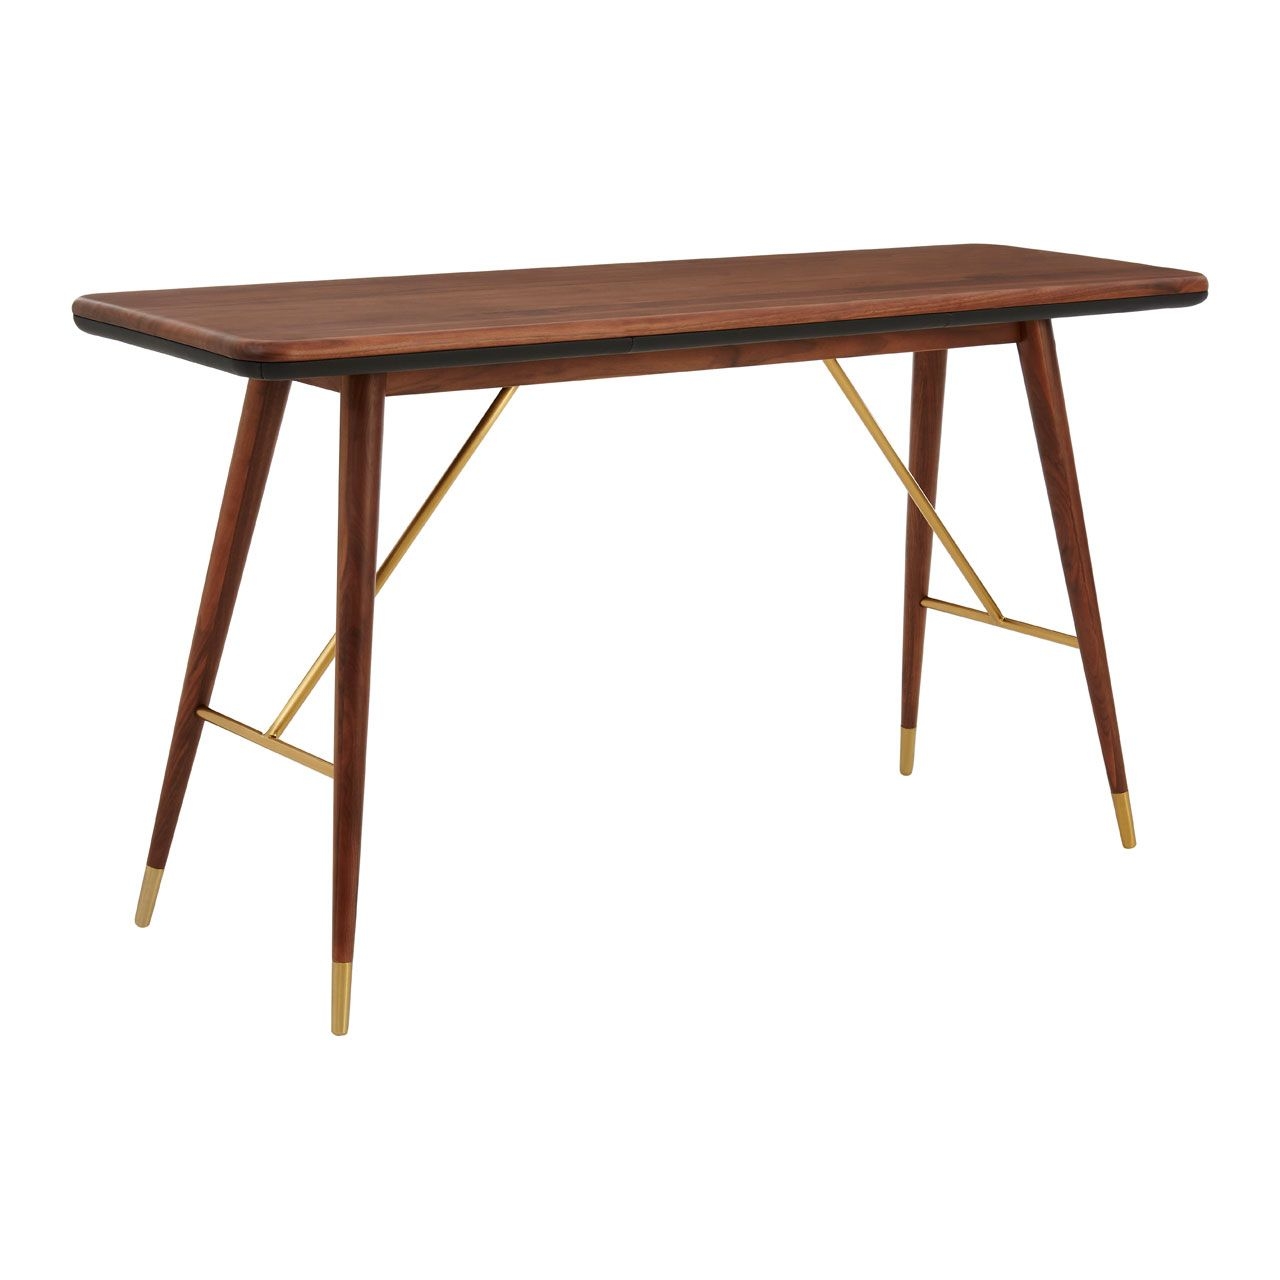 Kenso Wooden Console Table In Walnut